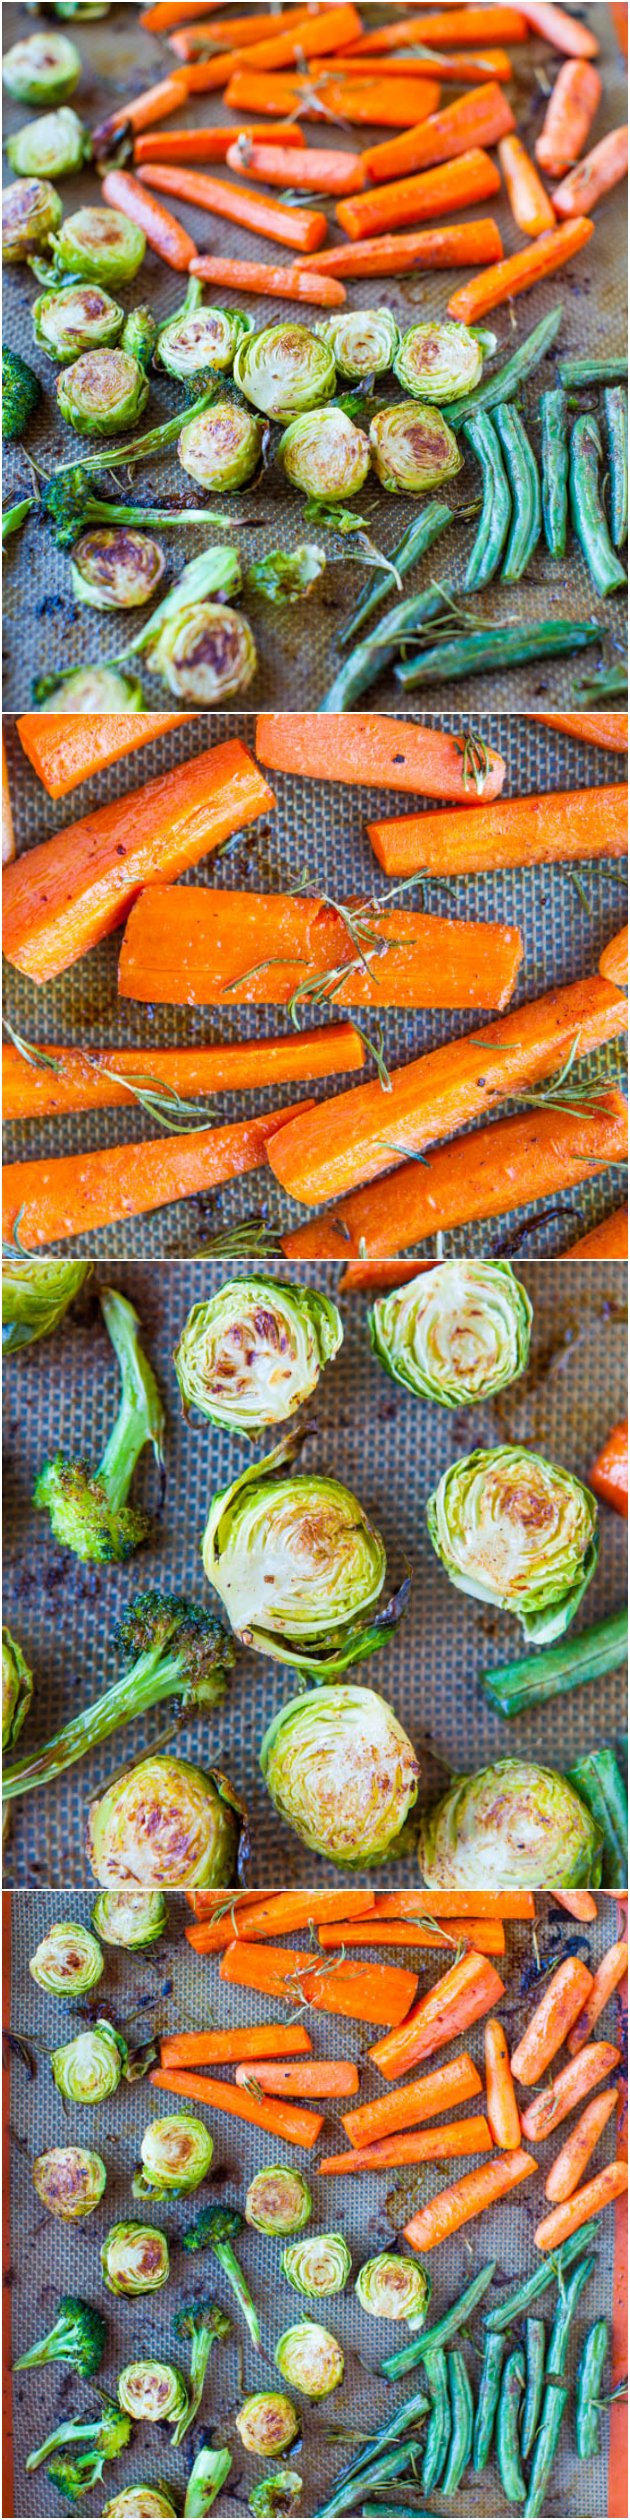 Lemon Rosemary Coconut Oil Roasted Vegetables (vegan, GF) - Trying to eat more veggies as a New Year's resolution? Try this flavorful, satisfying & easy recipe made with healthy coconut oil!